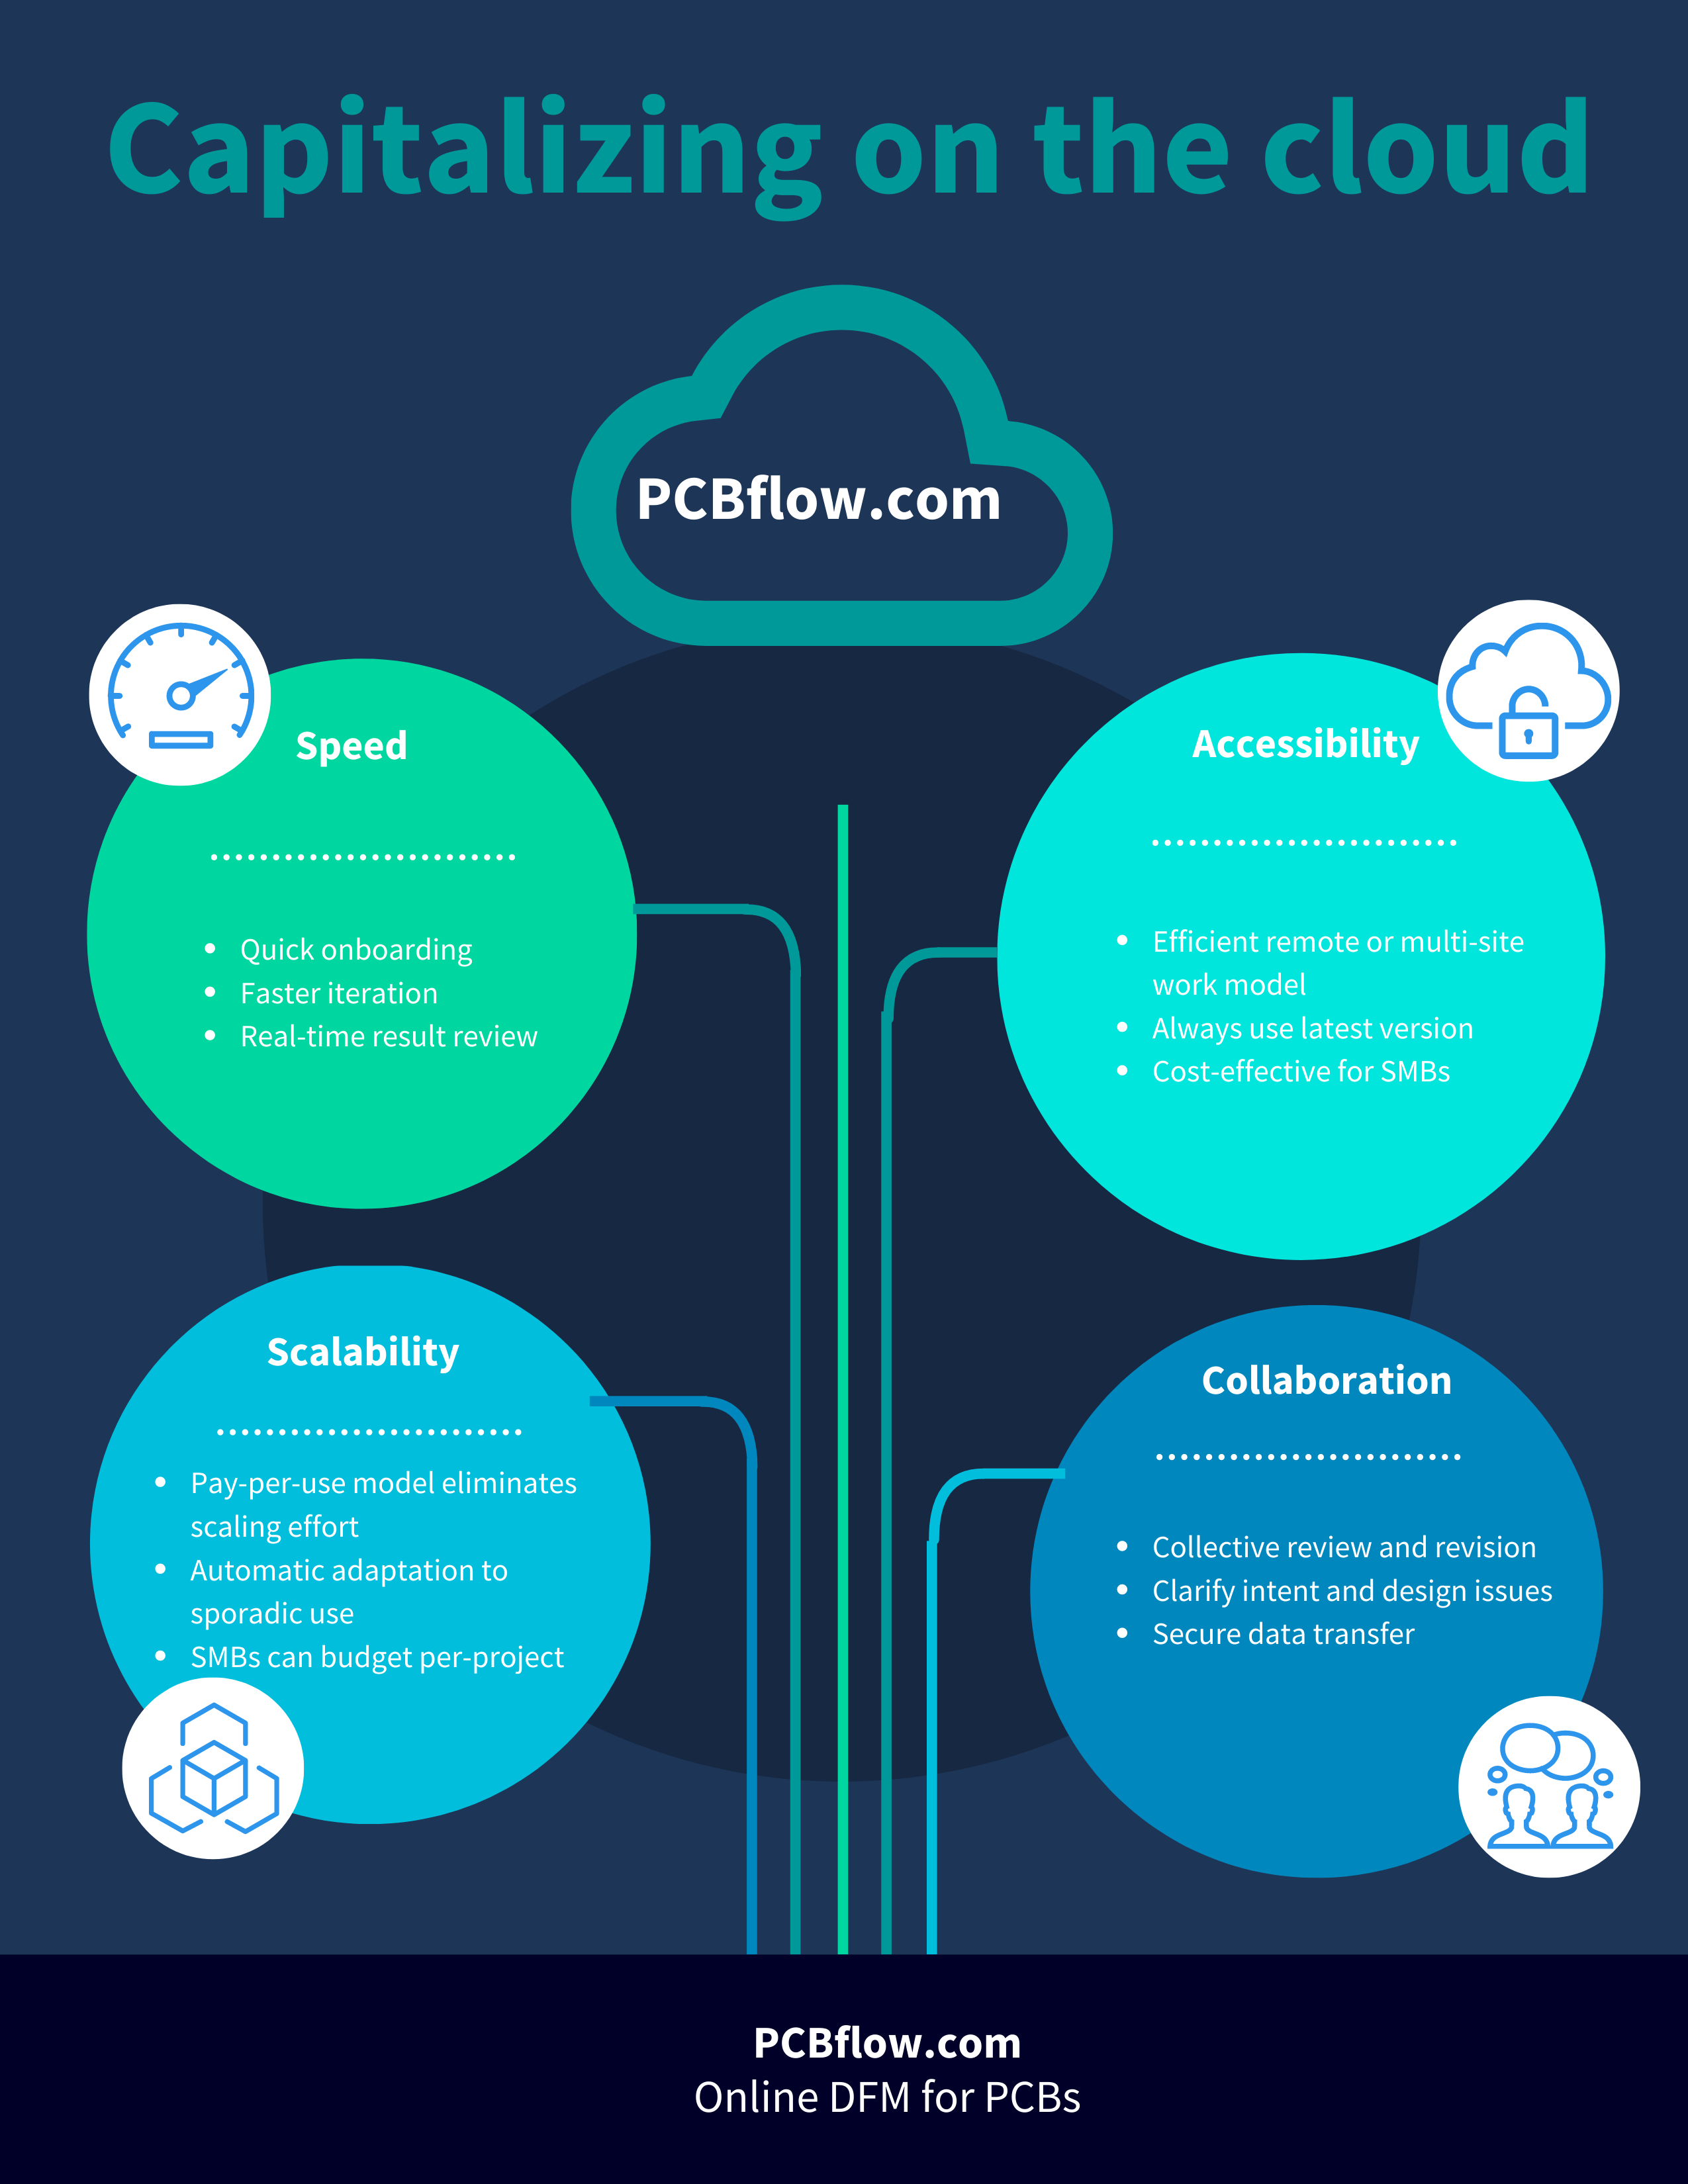 PCBflow Capitalizing on the Cloud